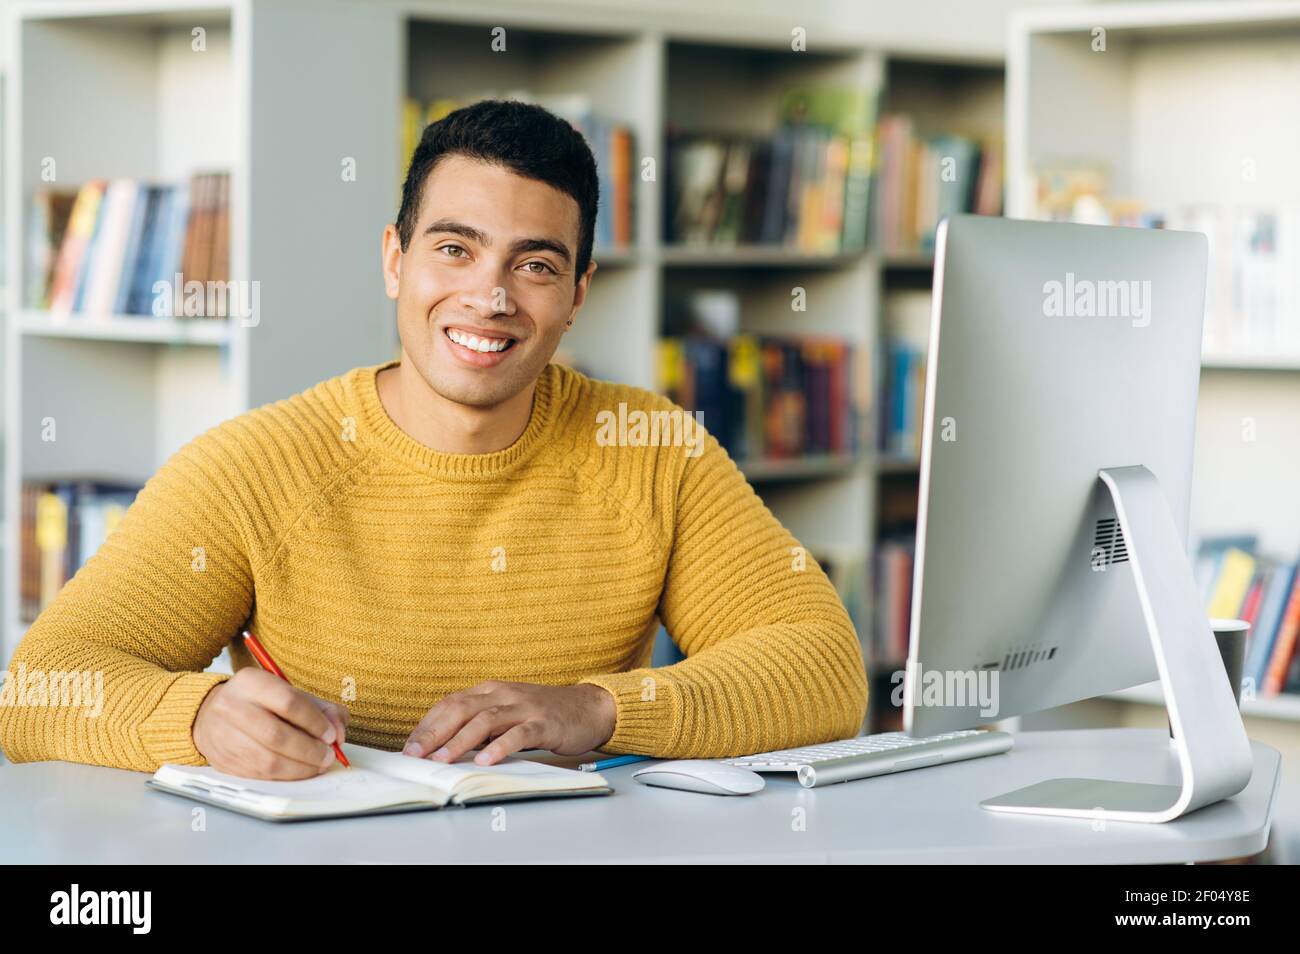 Successful hispanic male freelancer at the workplace, looks directly at the camera, smiling. Joyful handsome guy at webinar training or online conference Stock Photo